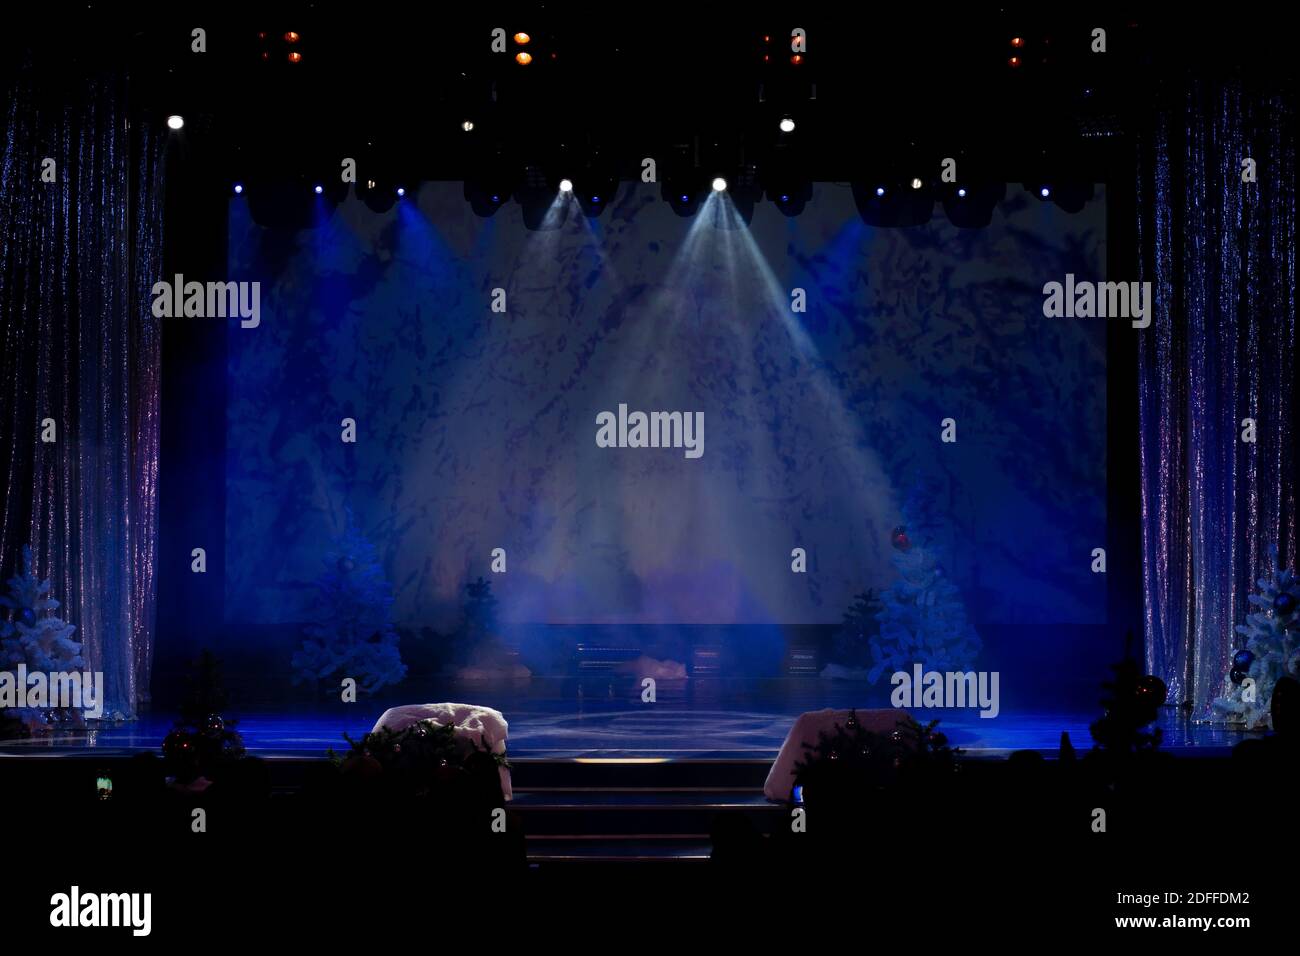 Cinema Theater High Resolution Stock Photography and Images - Alamy